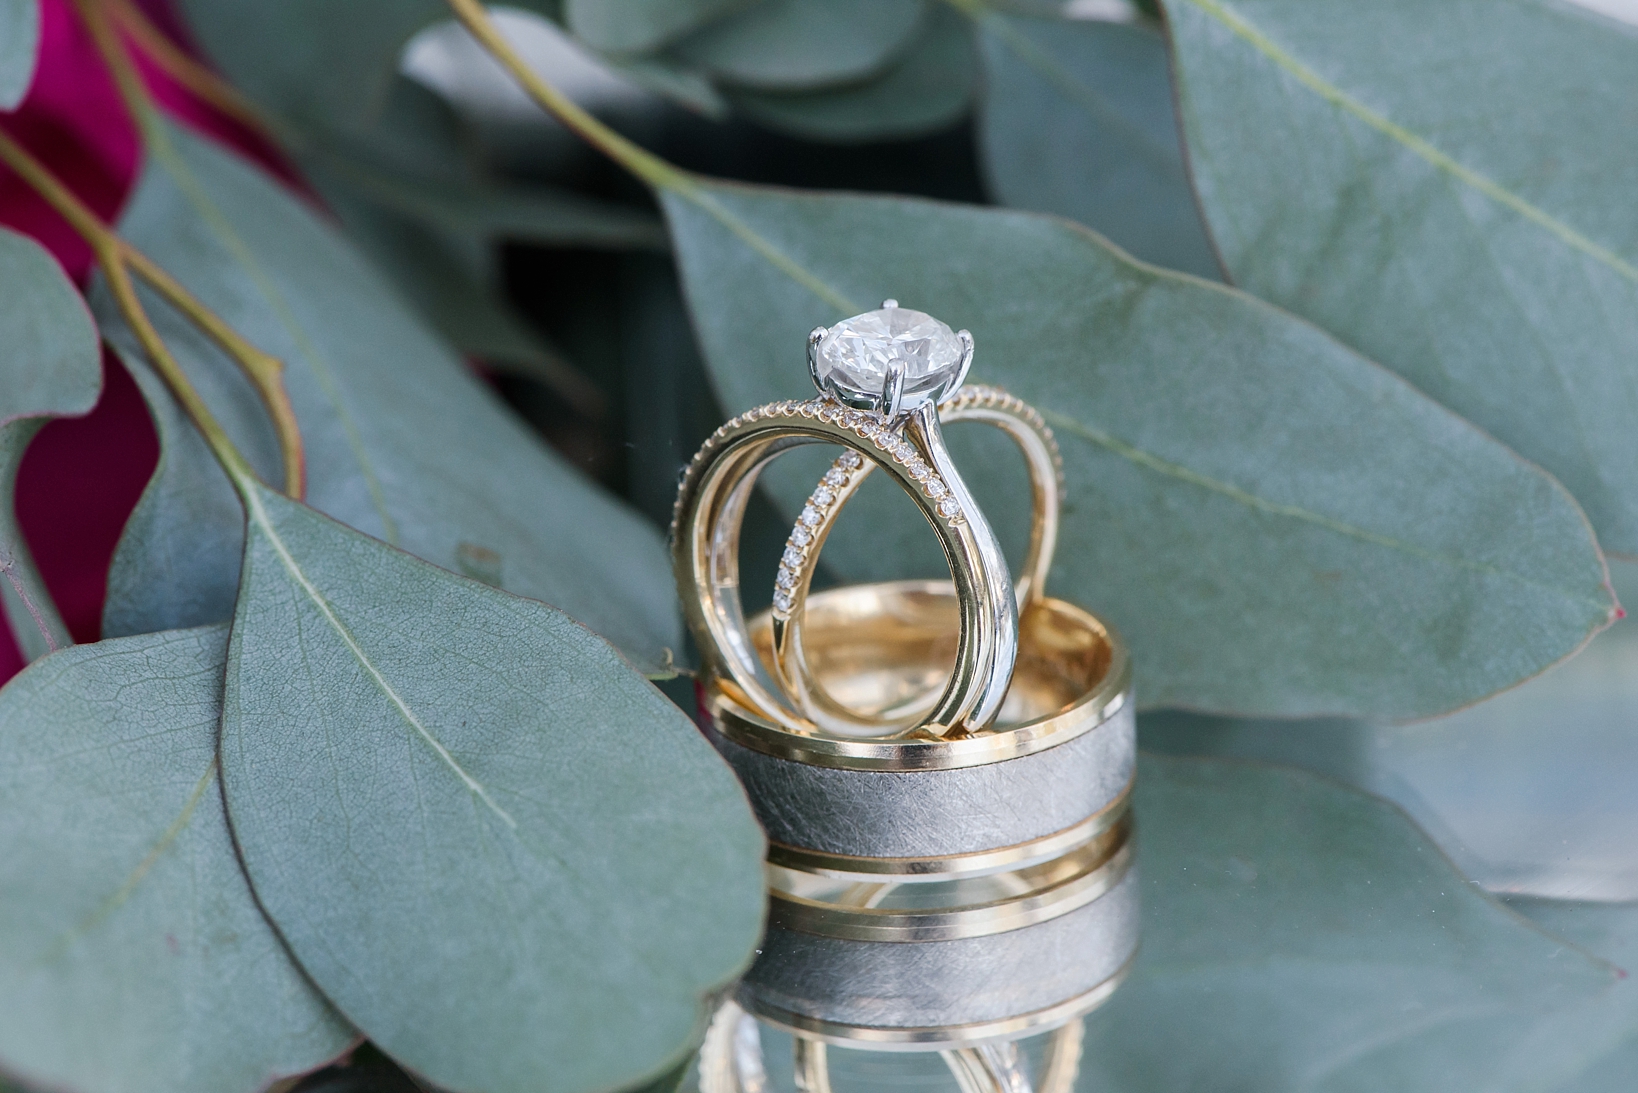 The wedding rings on a mirrored tabletop with accents of eucalyptus leaves by Sarah & Ben Photography